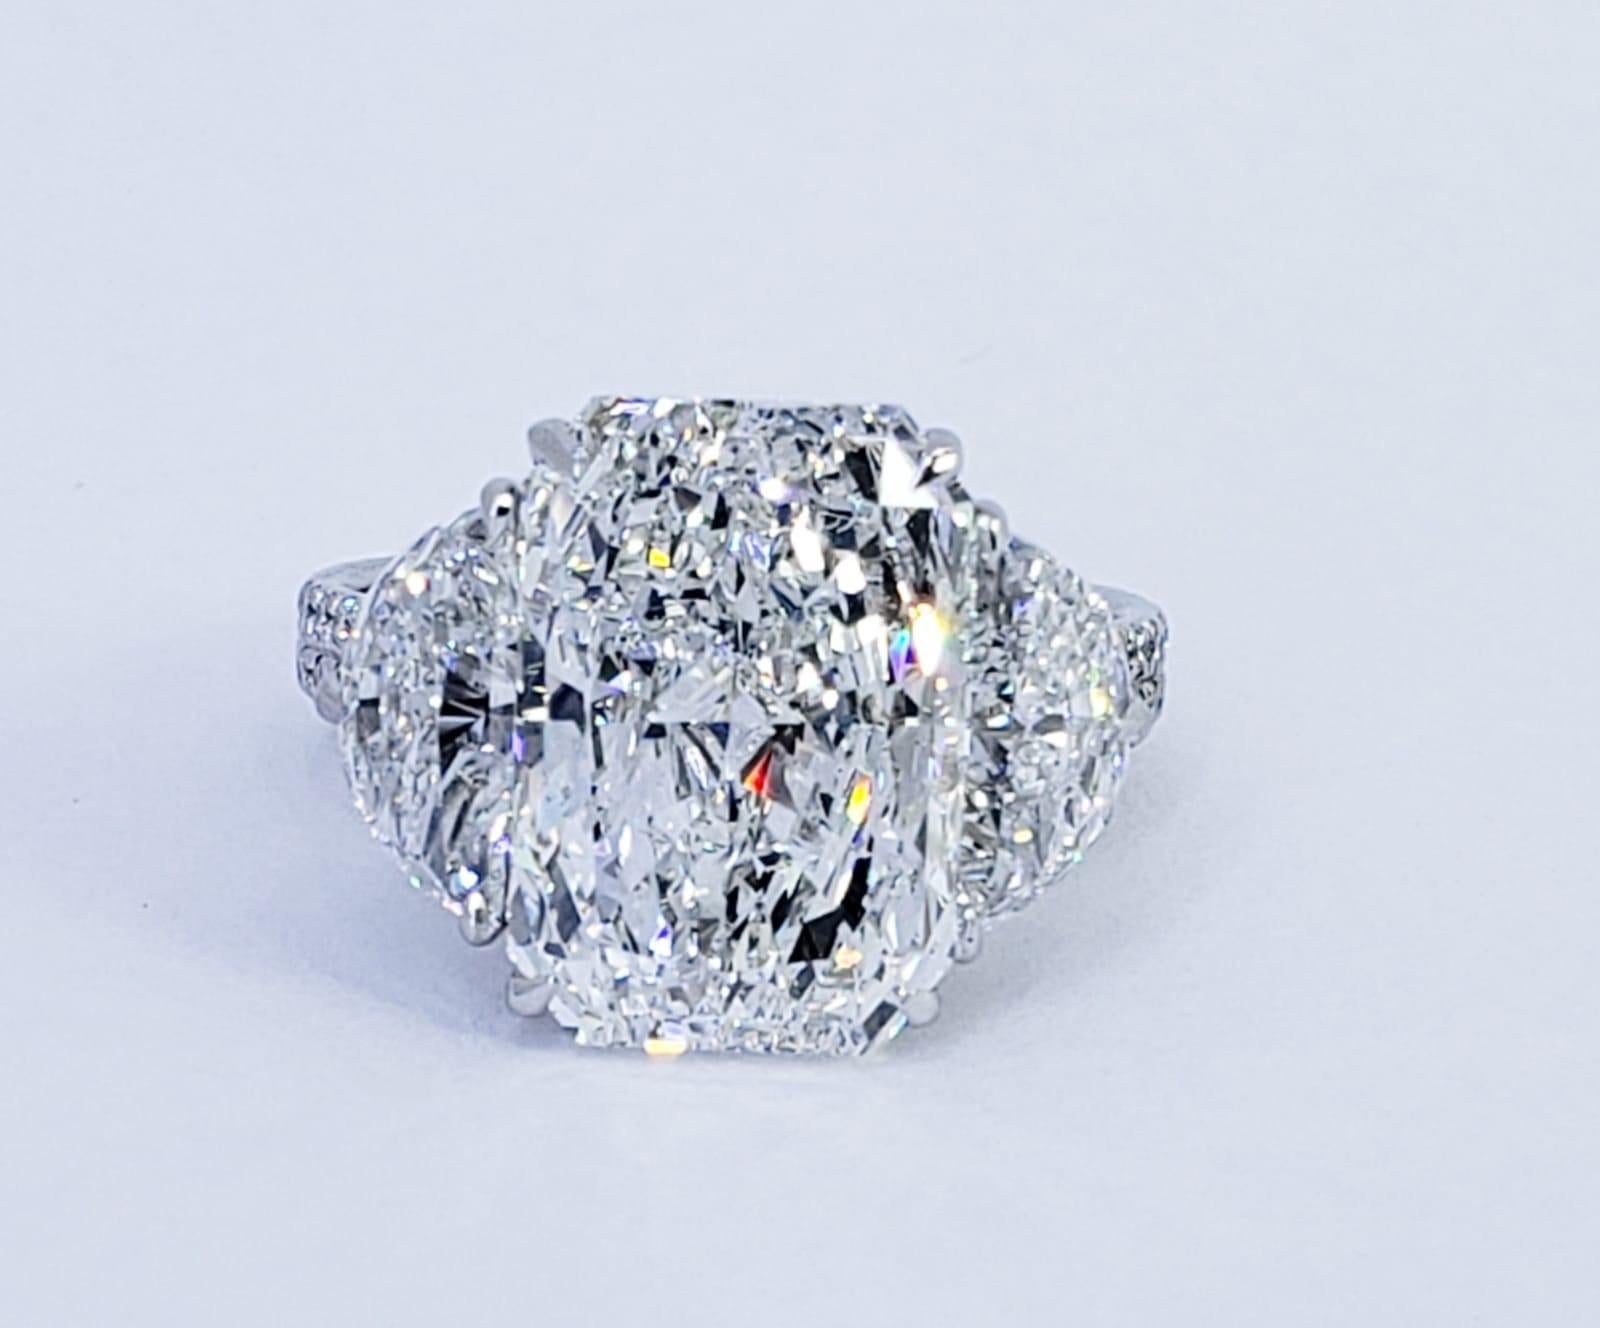 Rosenberg Diamonds & Co. 6.81 carat Radiant cut H color SI1 clarity is accompanied by a GIA certificate. This spectacular elongated Radiant is full of brilliance and it is set in a handmade platinum setting with perfectly matched pair of brilliant